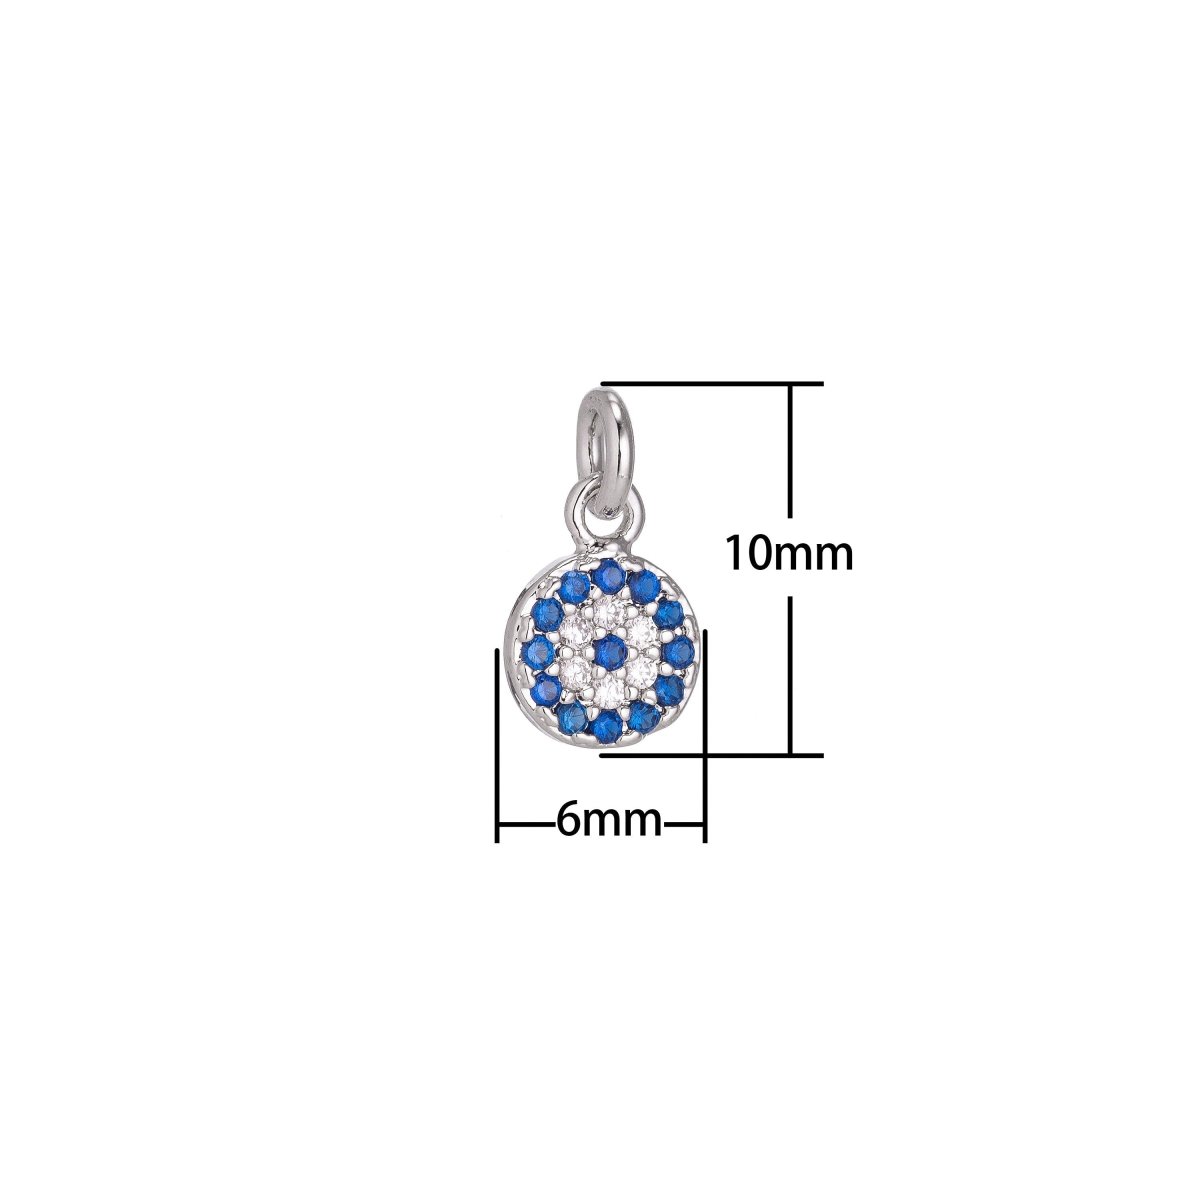 Products Dainty Tiny 18k Gold Fill / White Gold Coin Round Charm Pave CZ Cubic Zirconia pendant for Earring, Necklace, Bracelet Jewelry Making Supply C-160 - DLUXCA